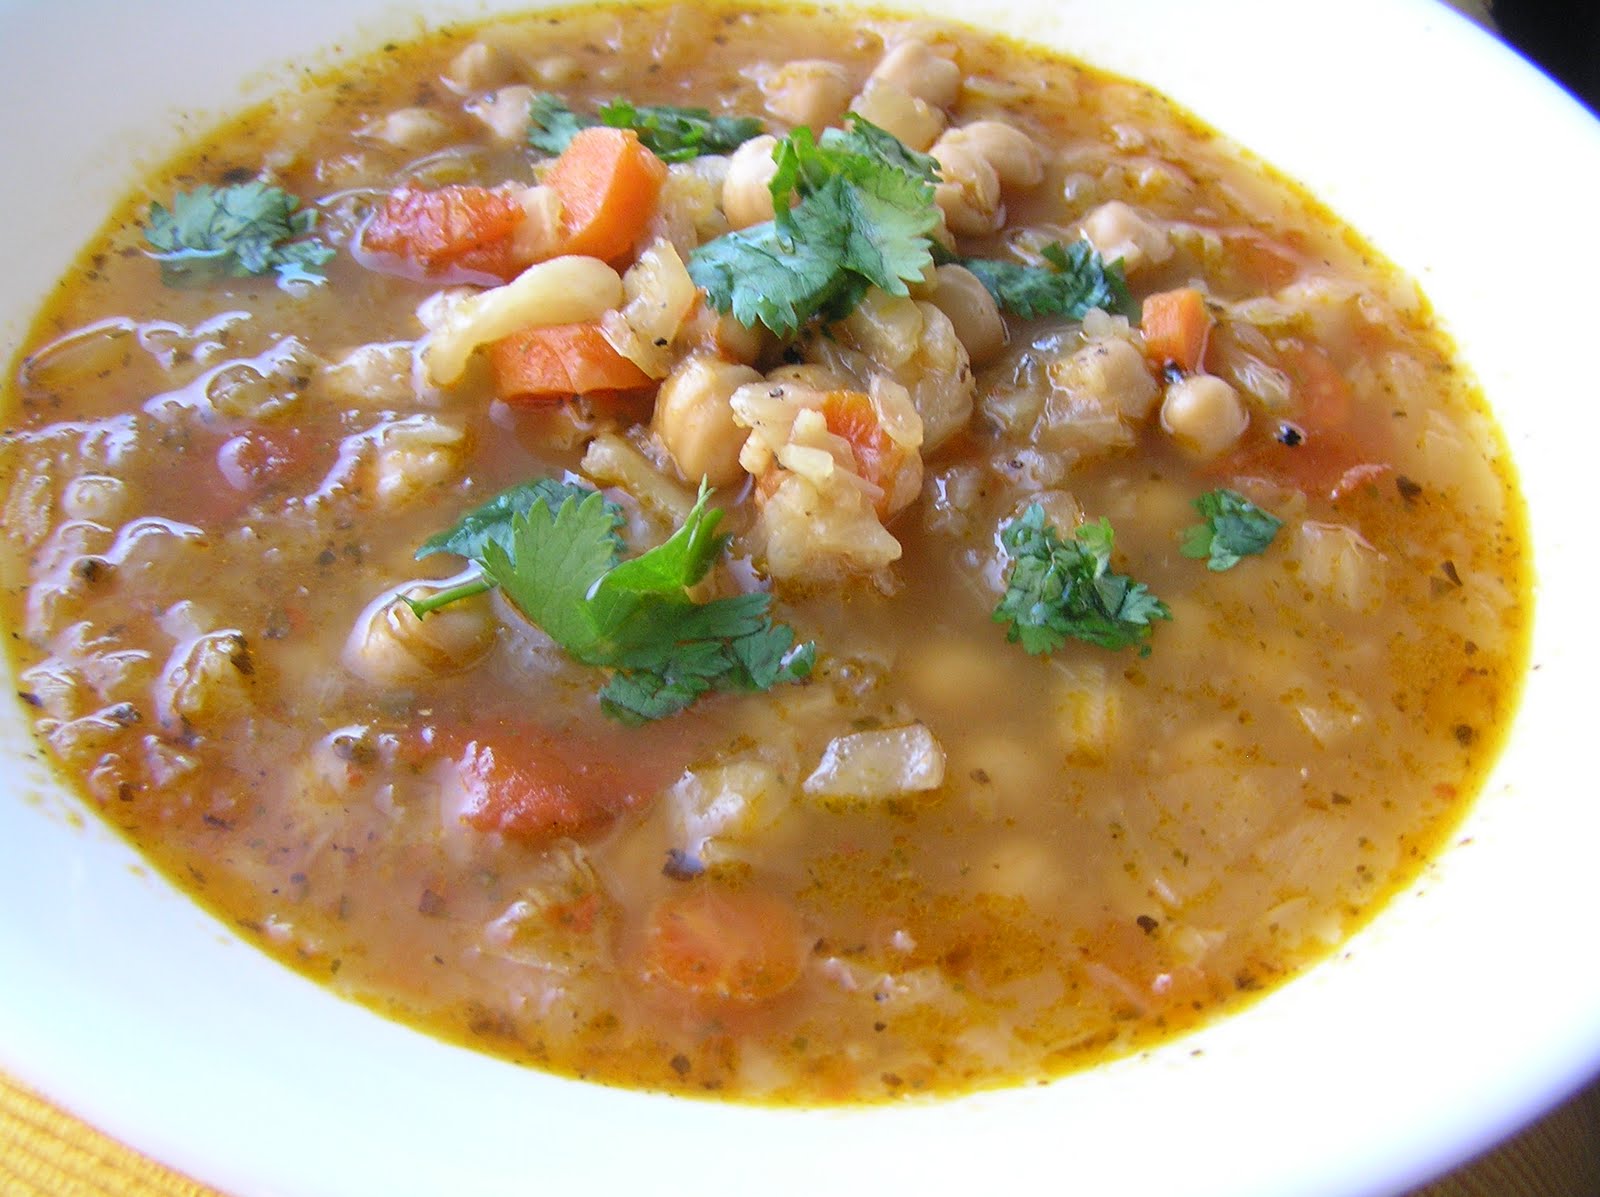 The Melting Pot: Cabbage and Chickpea Soup